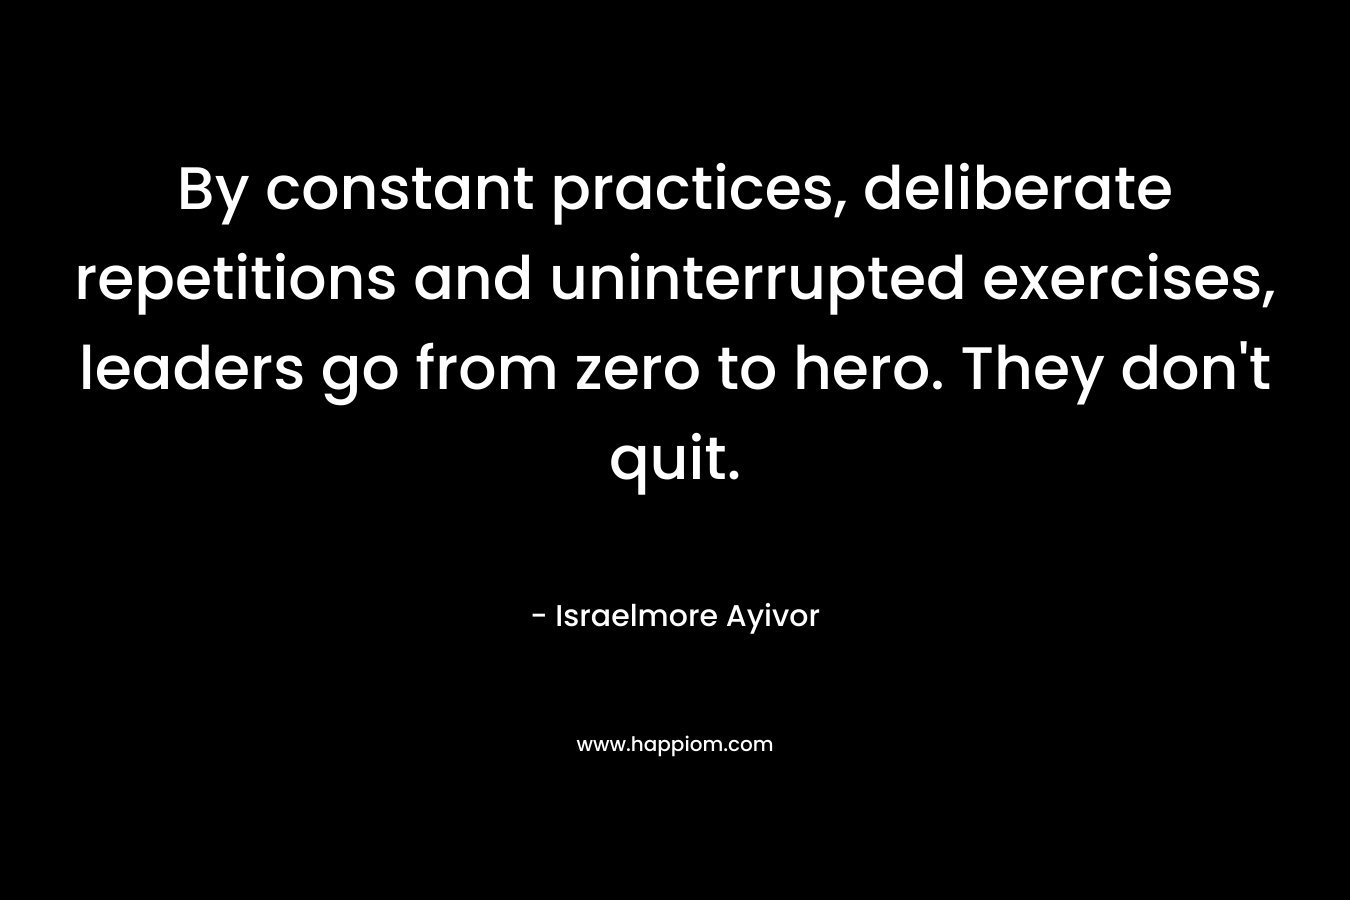 By constant practices, deliberate repetitions and uninterrupted exercises, leaders go from zero to hero. They don't quit.